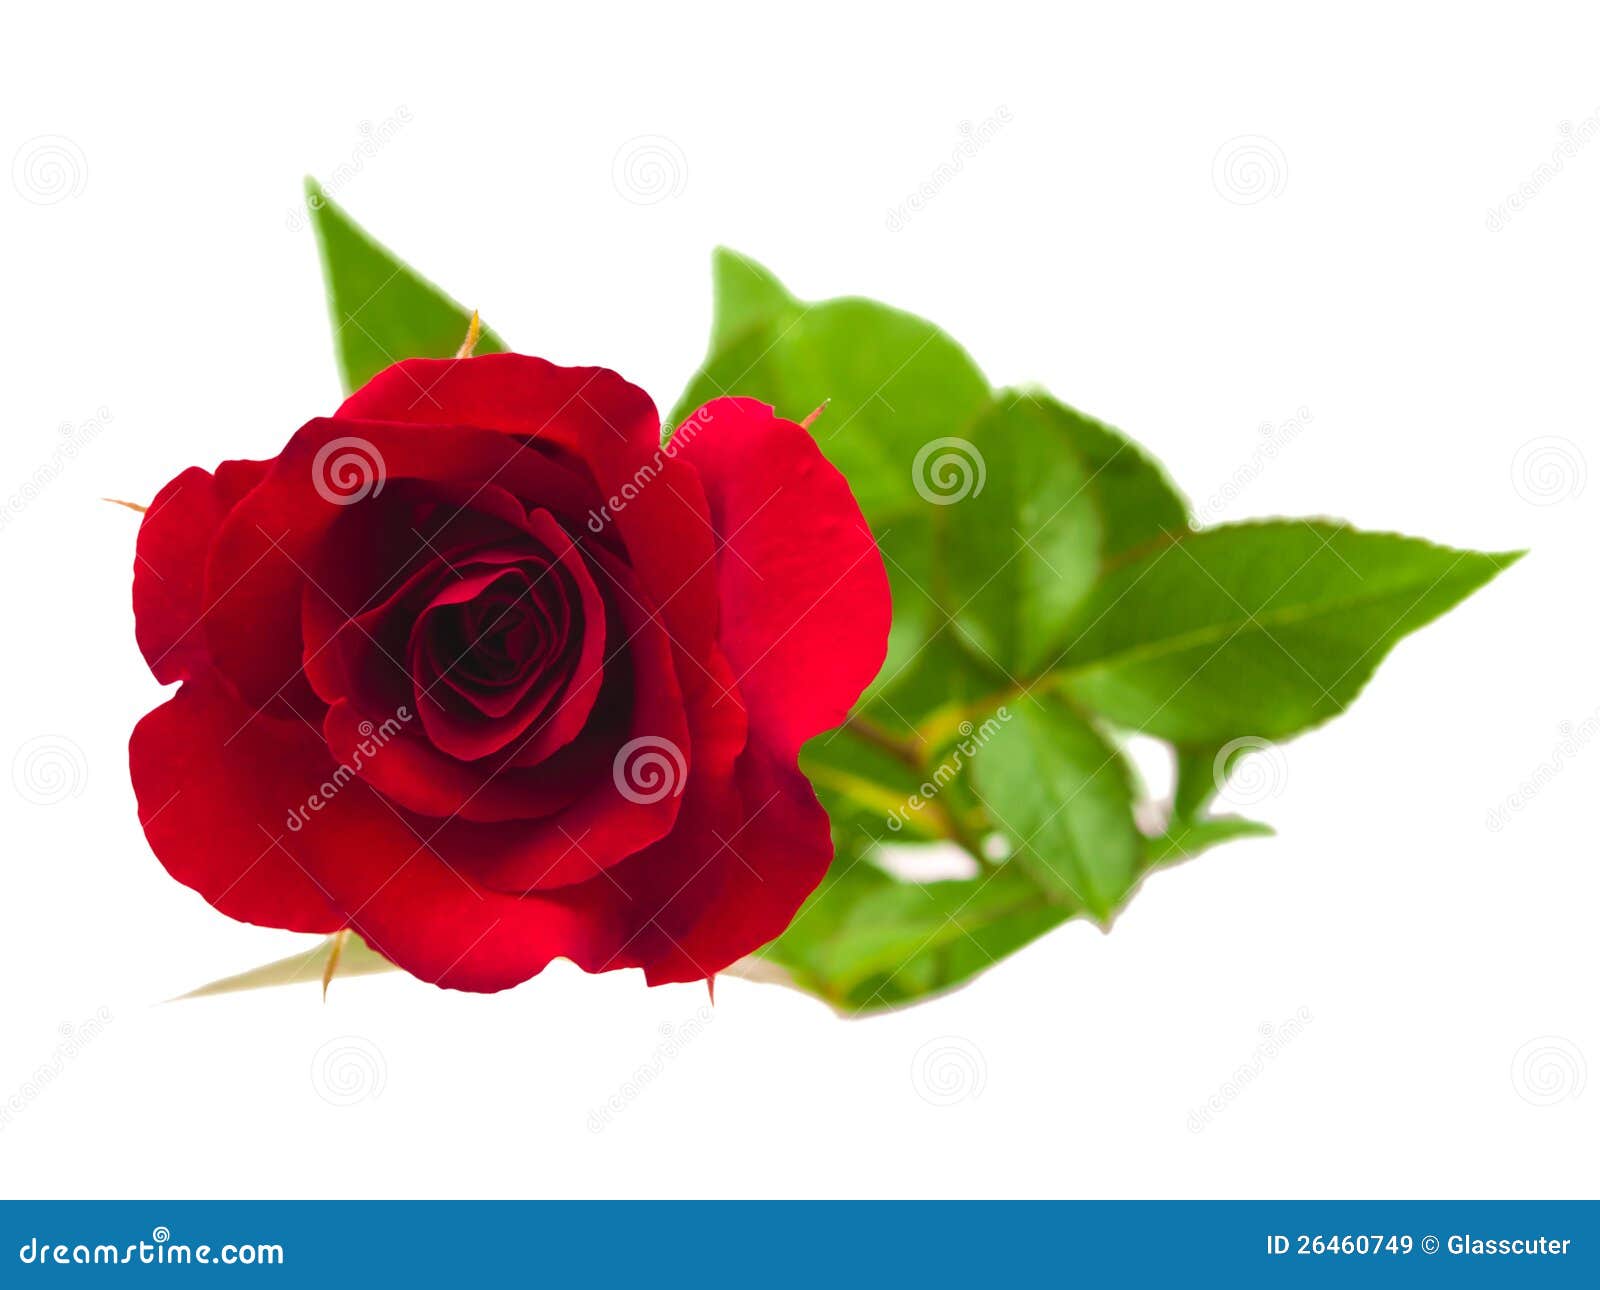 A flower of roses. stock image. Image of passion, perfection - 26460749